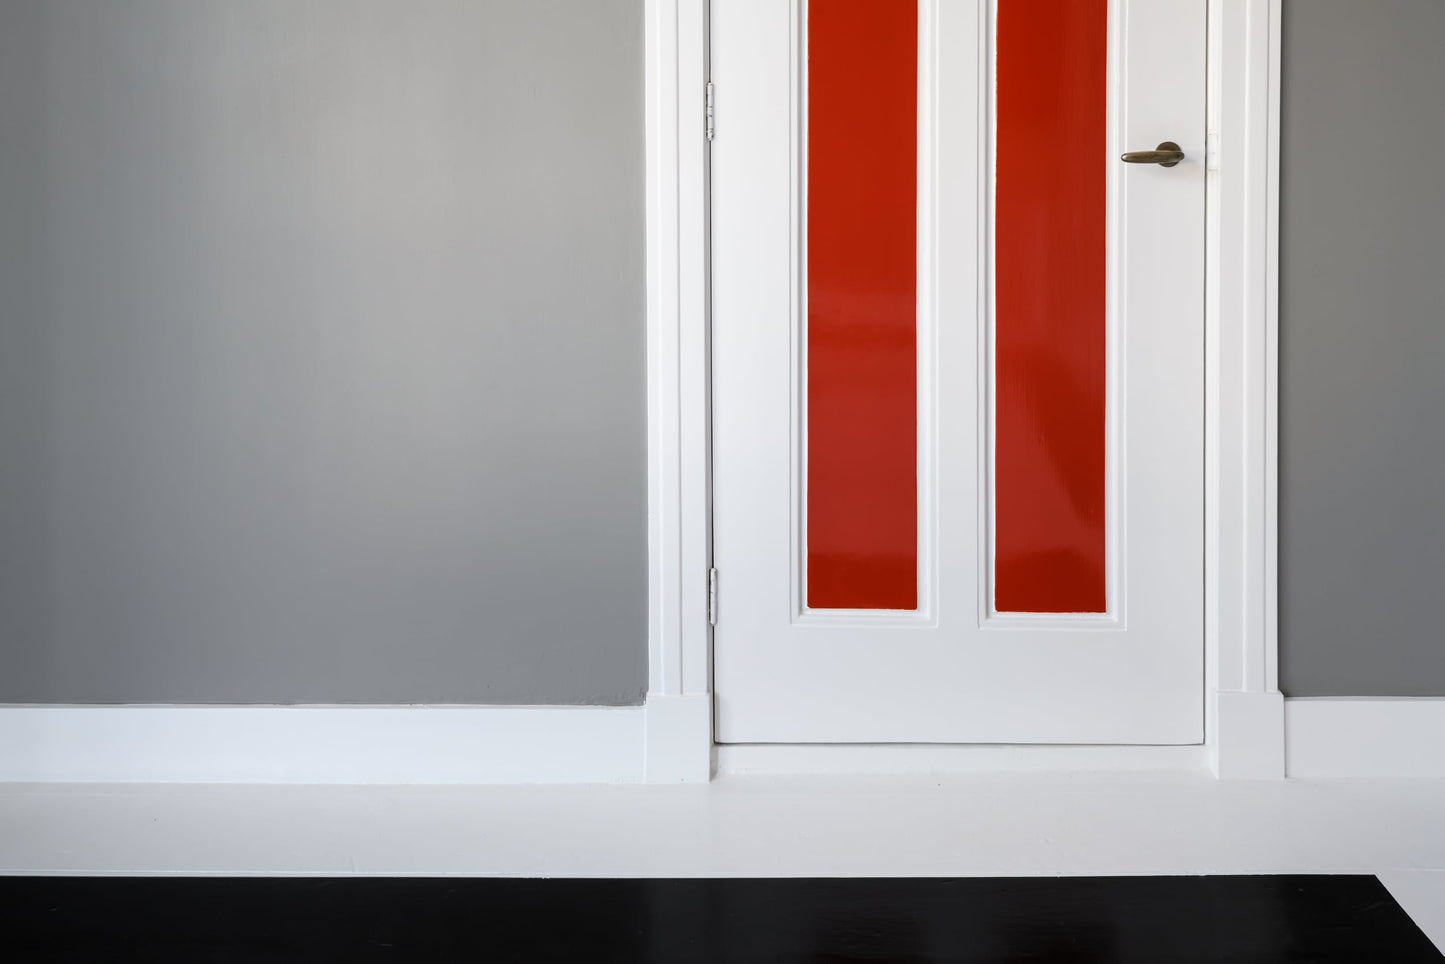 The artwork 'Van Doesburg-Rinsemahuis #6' by J.T. Hof displaying a grey wall and lower half of a white door with two red stripes